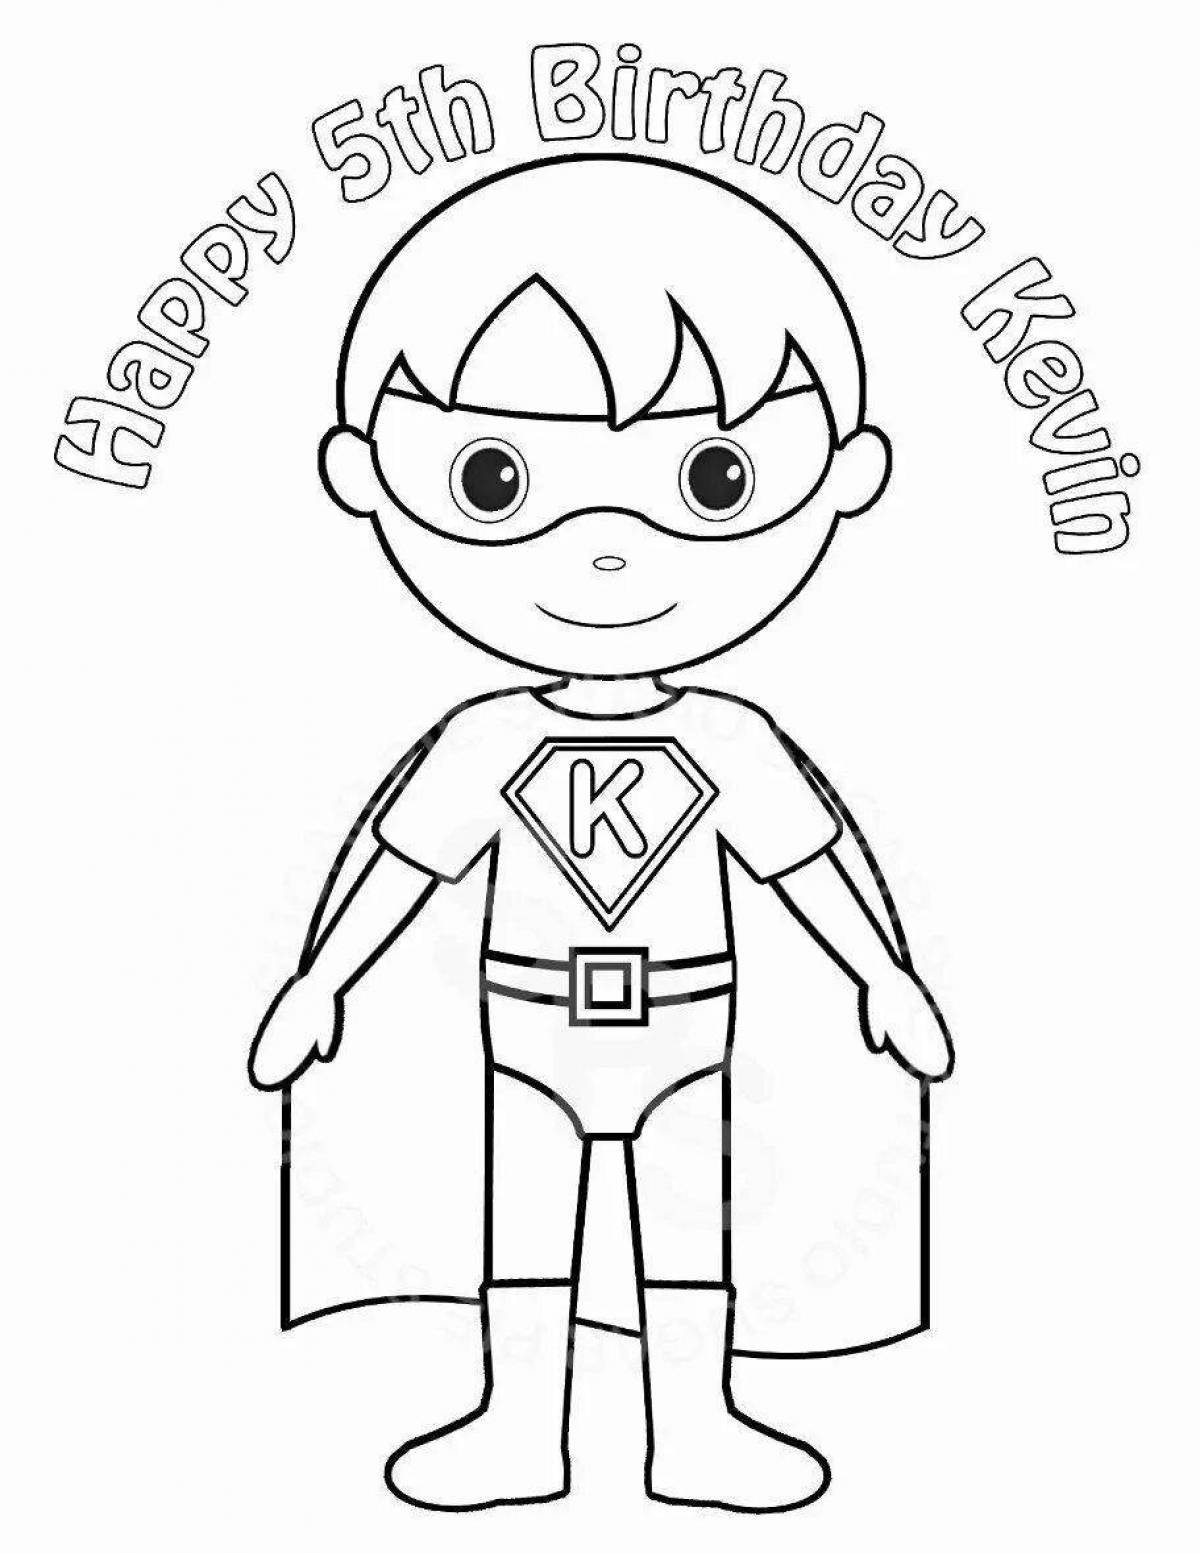 Superman coloring book for kids 3-4 years old